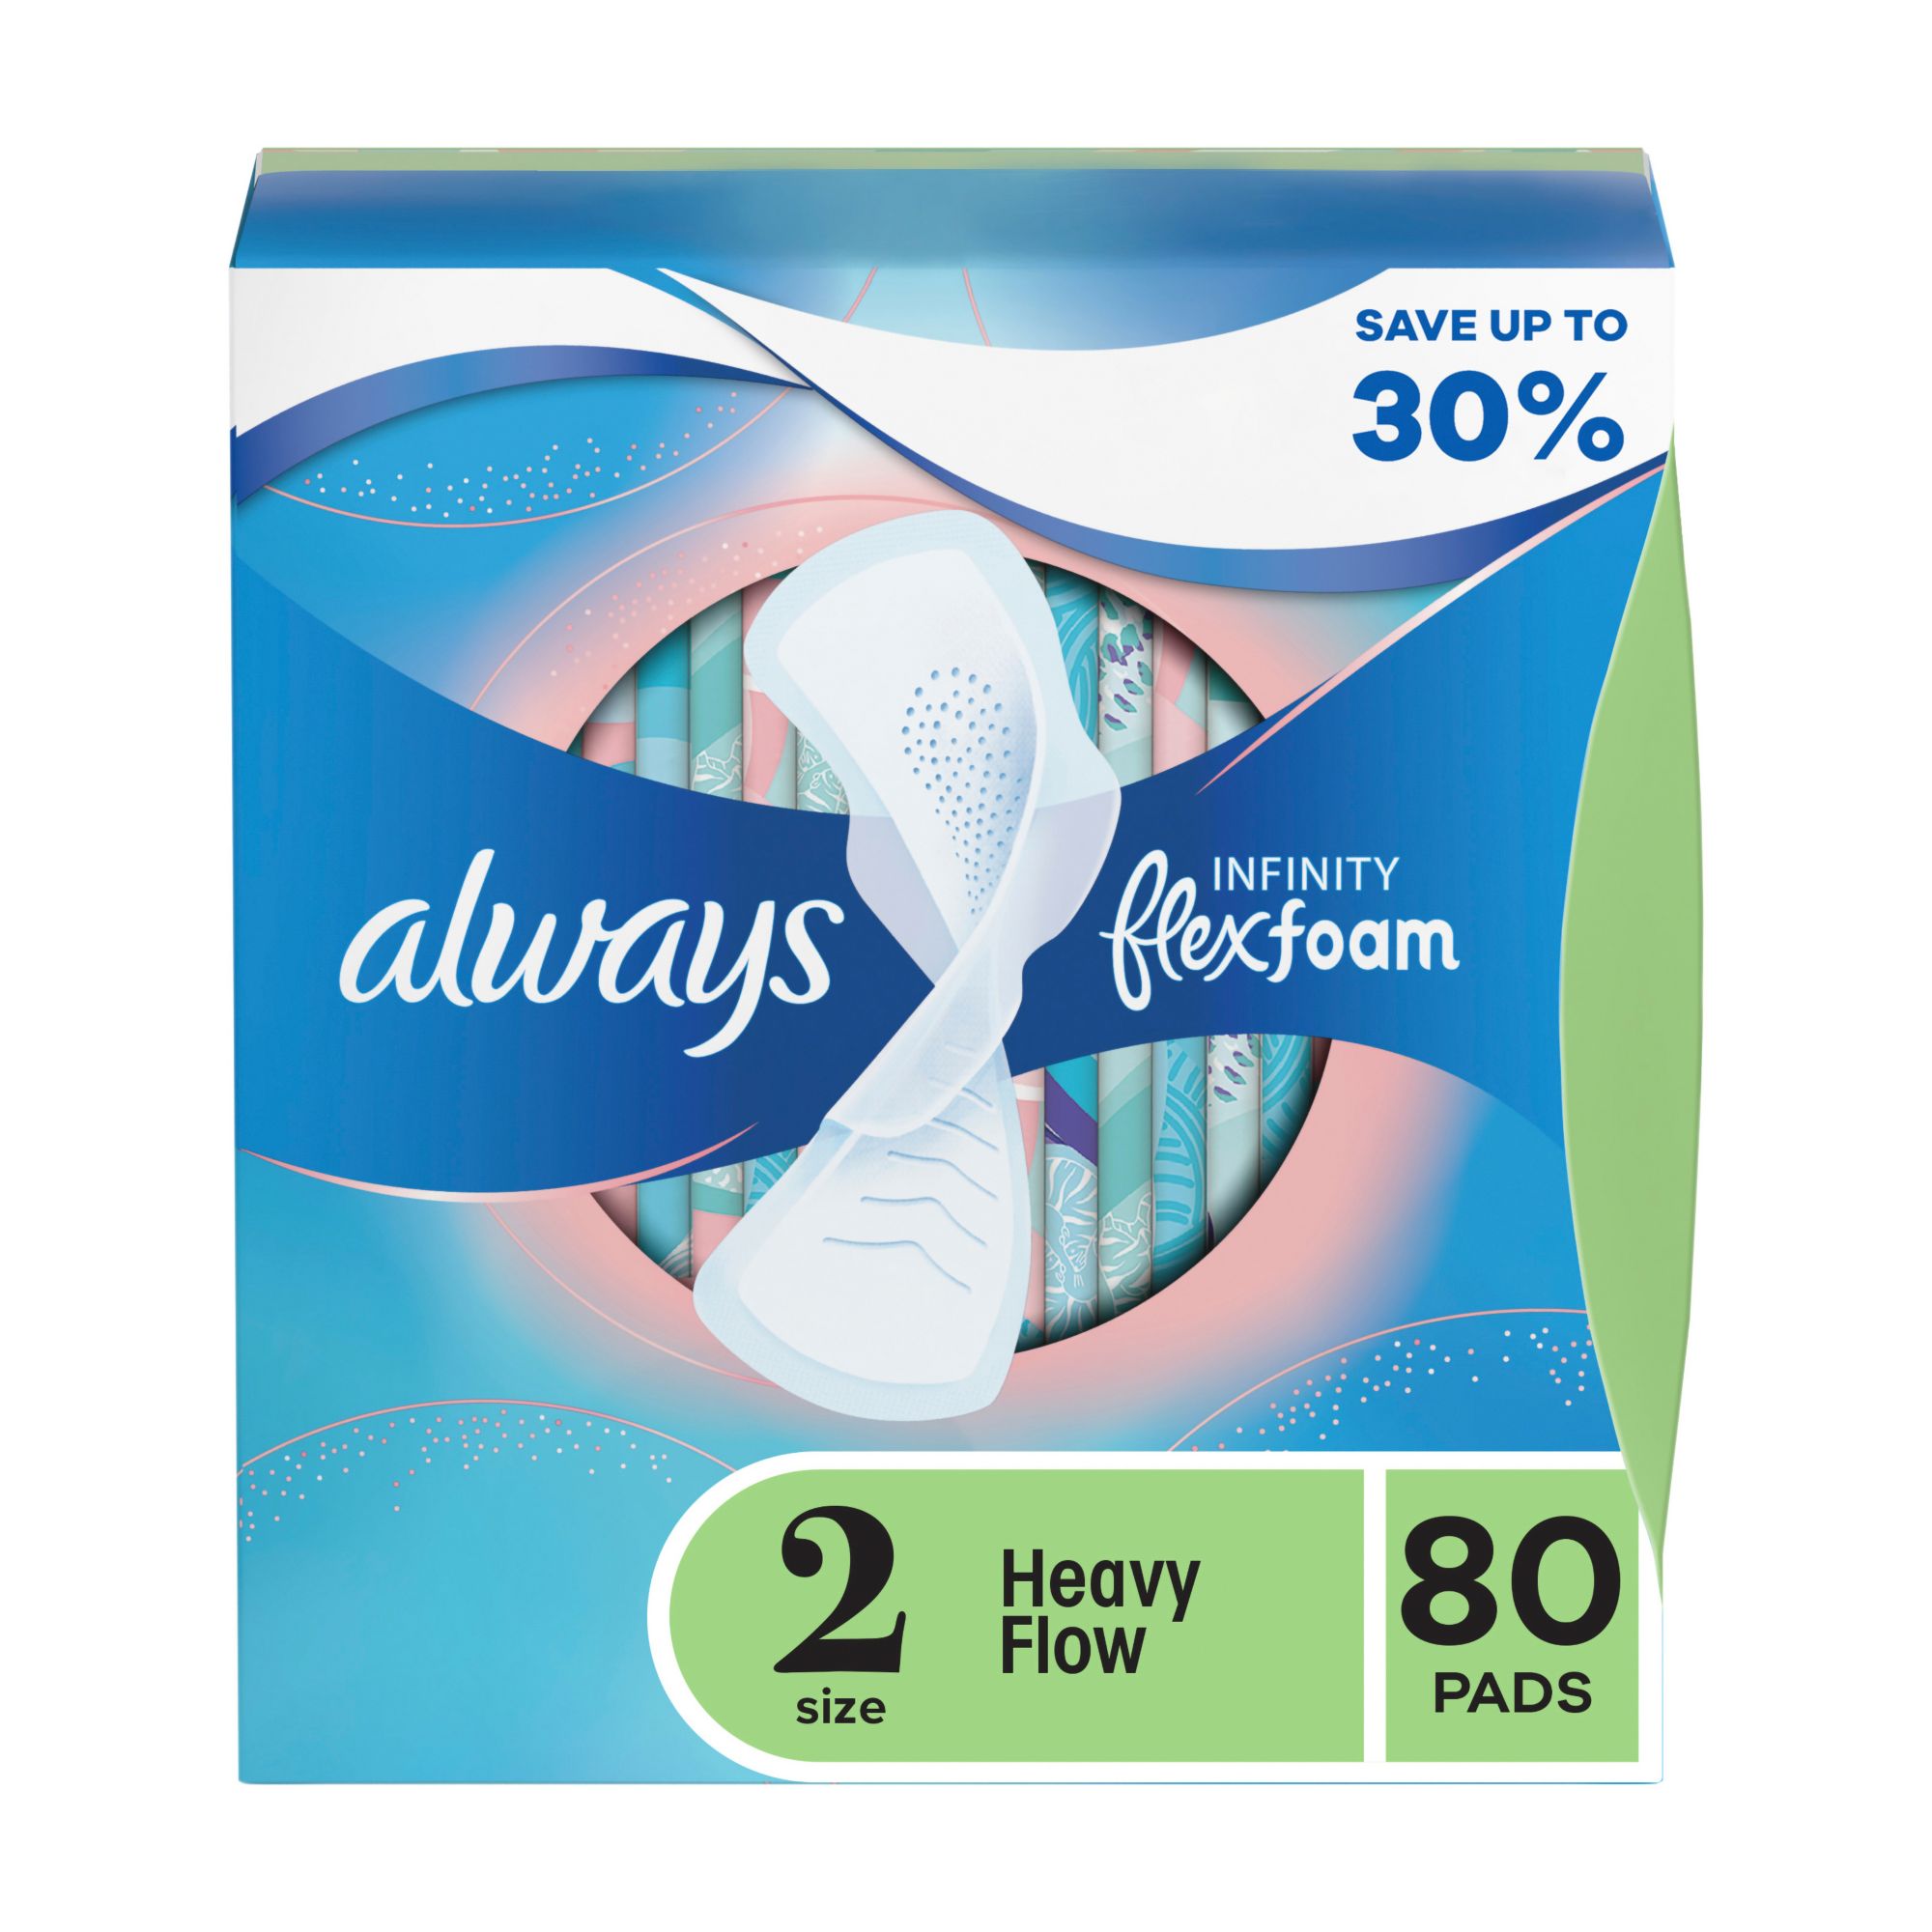 Always Infinity Flex Foam Extra Heavy Absorbency Overnight Pads Unscented  Size 4 (13 ct)